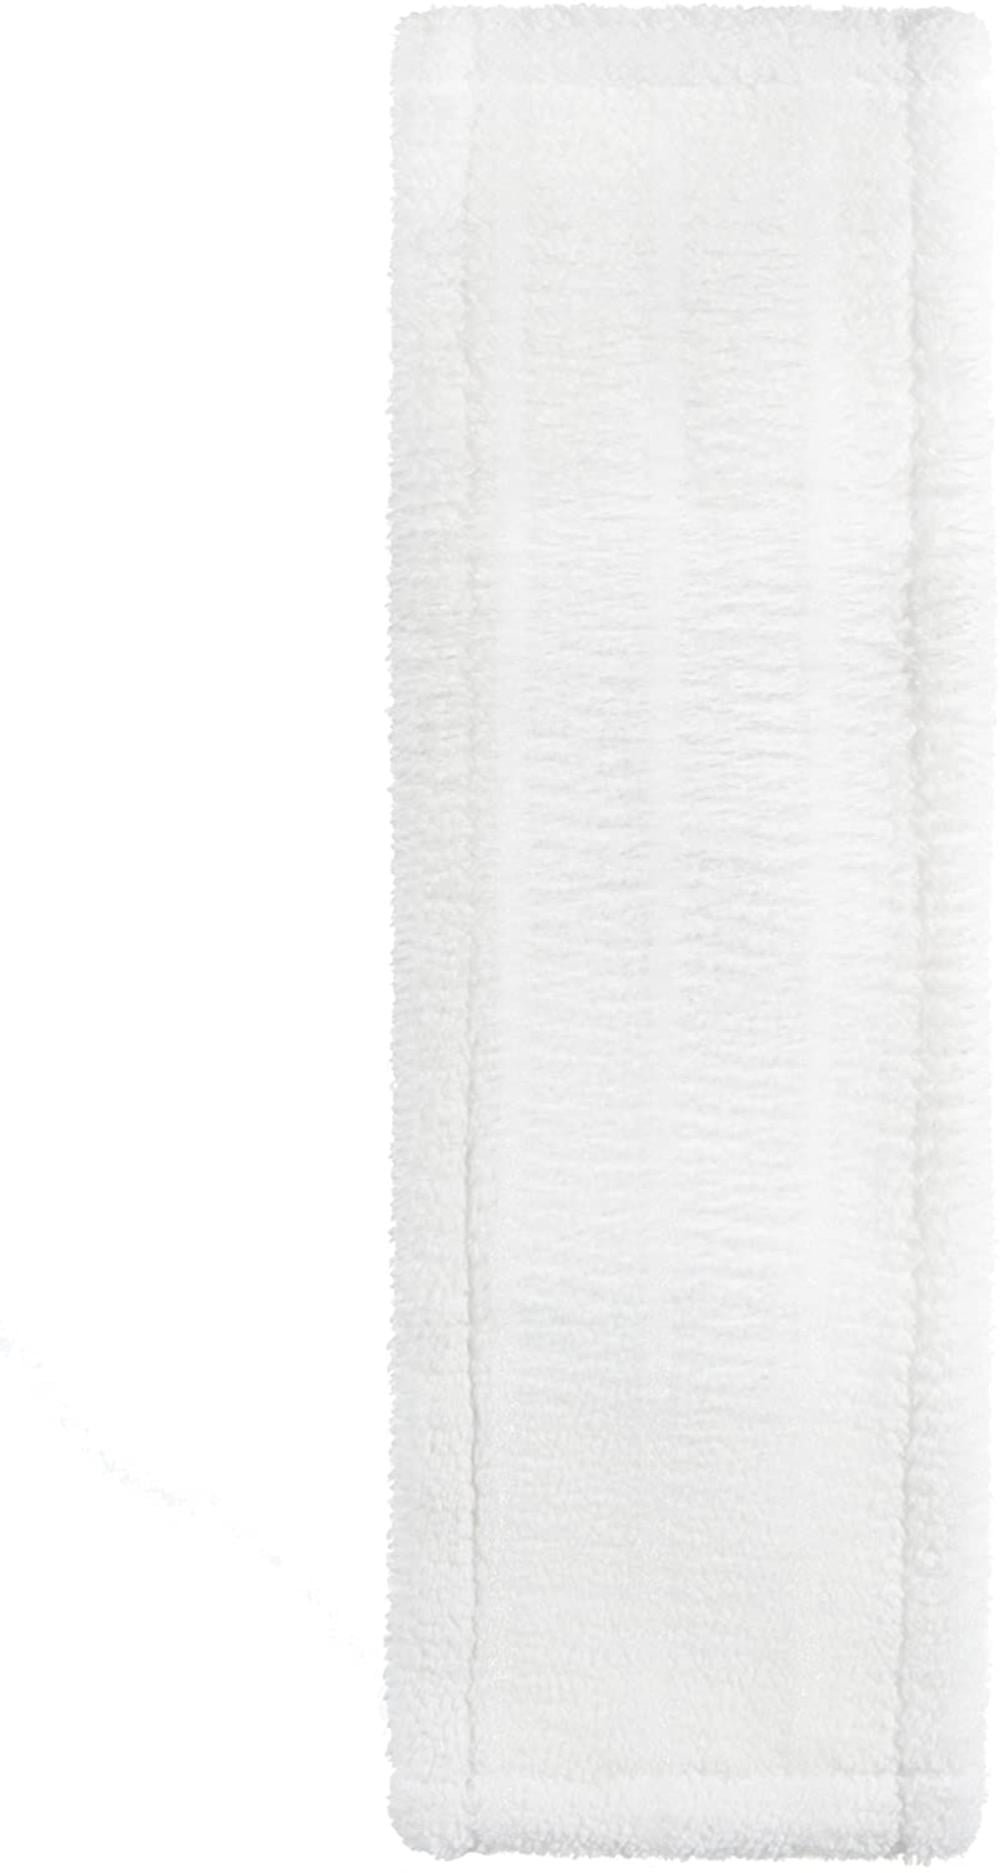 Full Circle Mighty Mop 2-in-1 Wet/Dry Microfiber Head White 